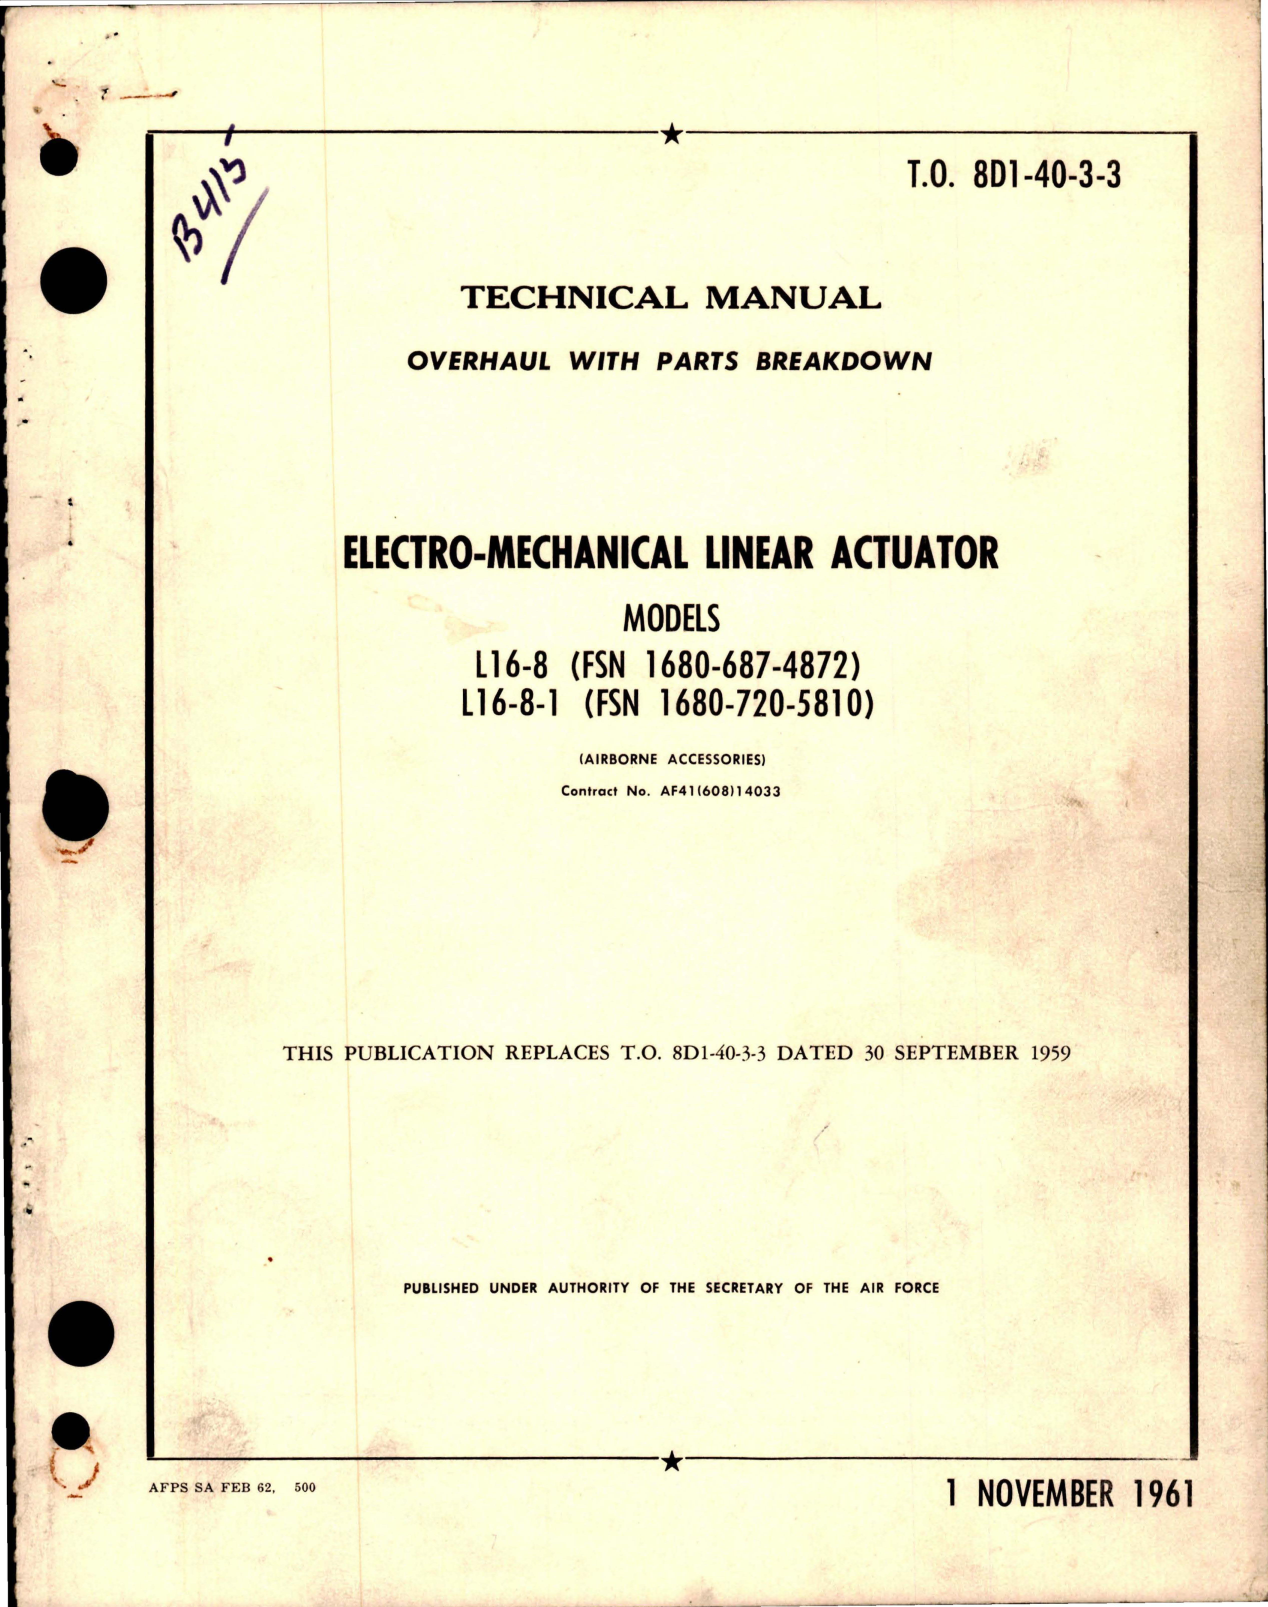 Sample page 1 from AirCorps Library document: Overhaul with Parts Breakdown for Electro-Mechanical Linear Actuator - Models L16-8 and L16-8-1